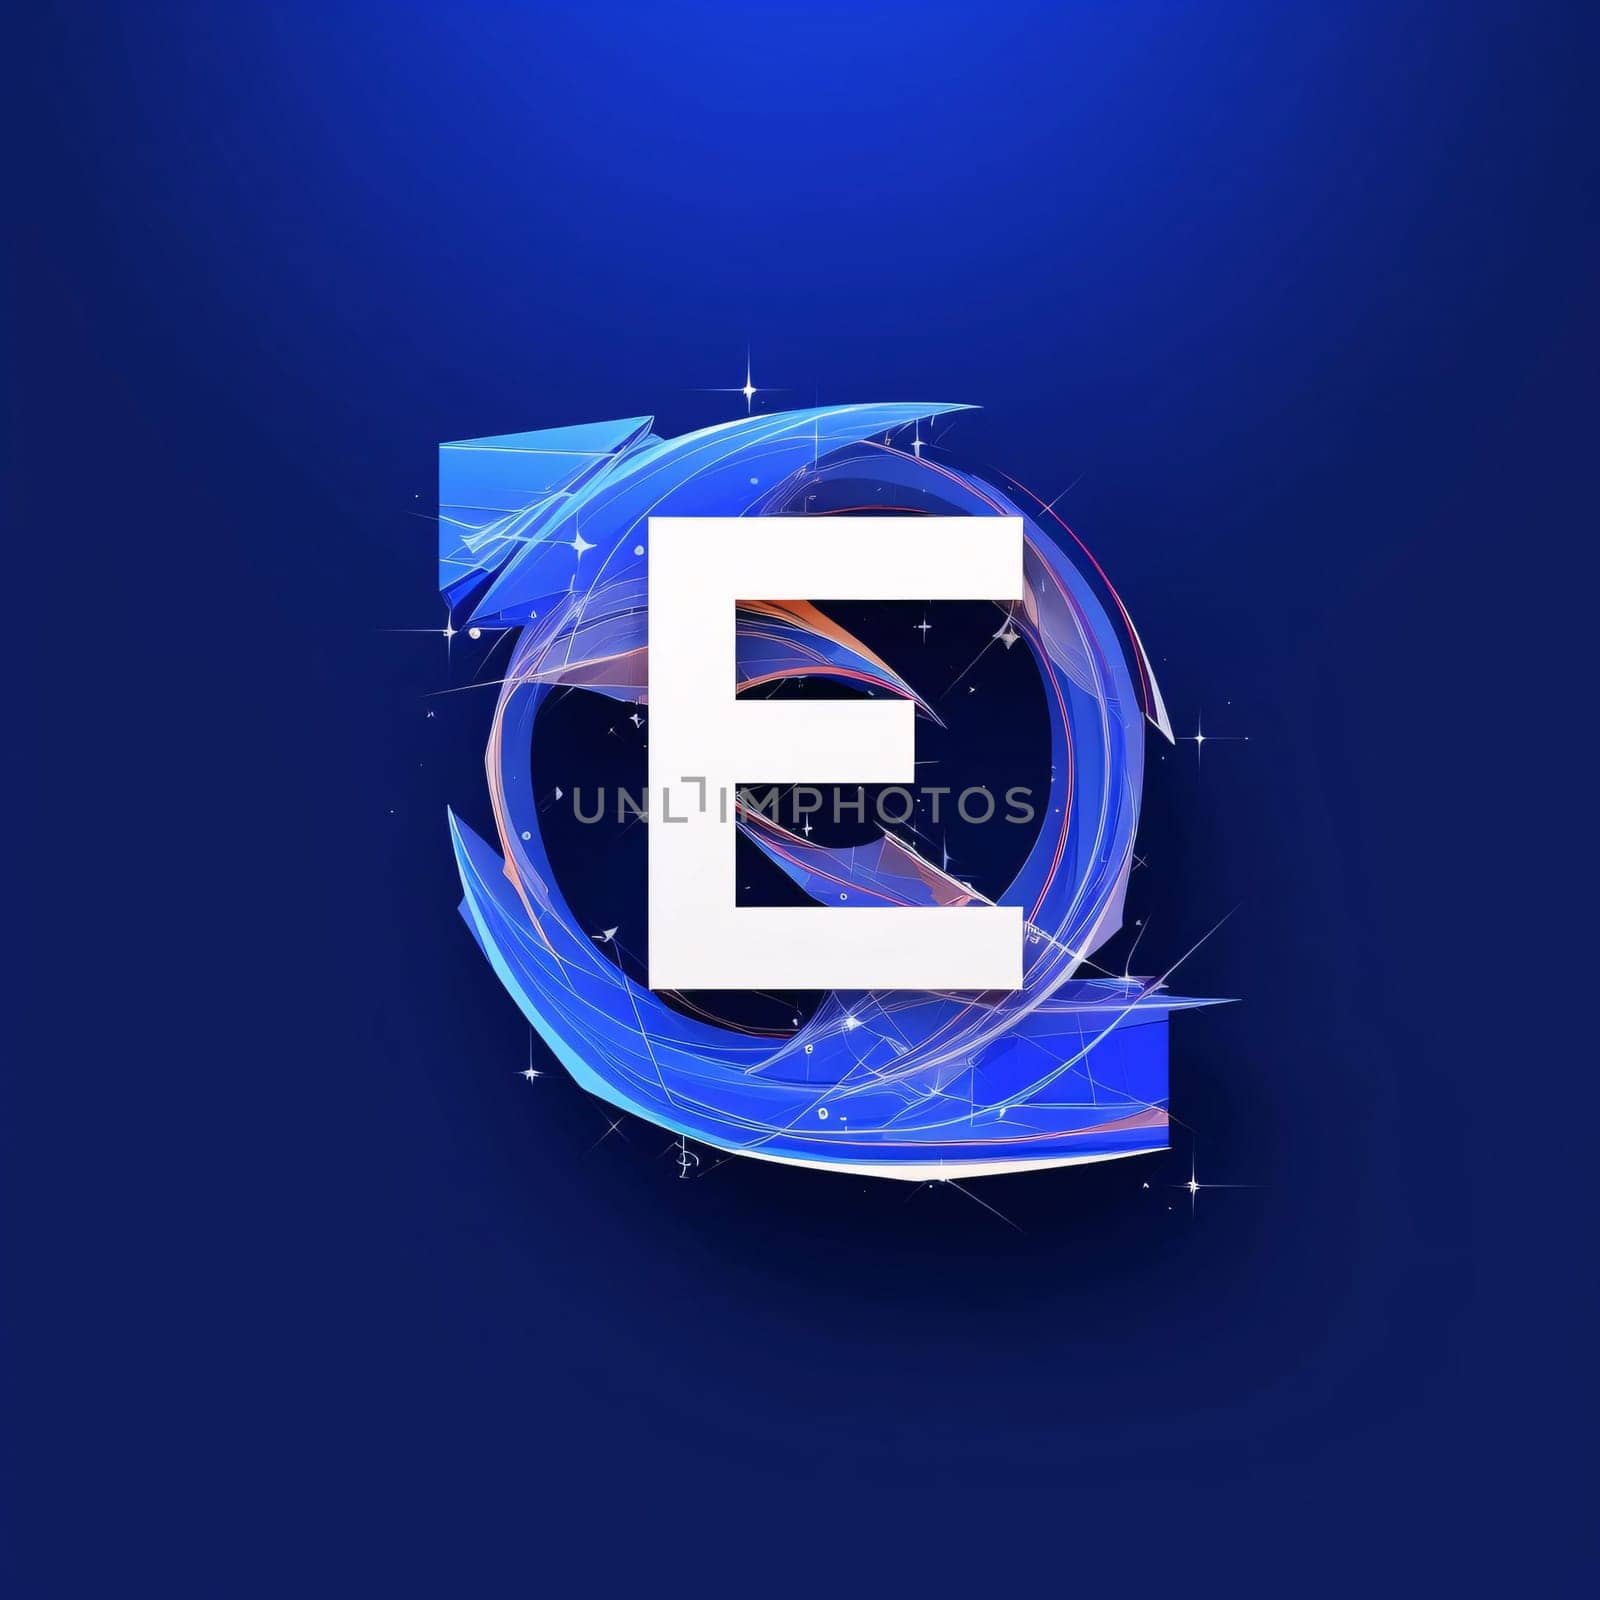 Graphic alphabet letters: Abstract letter E on blue background. Vector illustration. Eps 10.